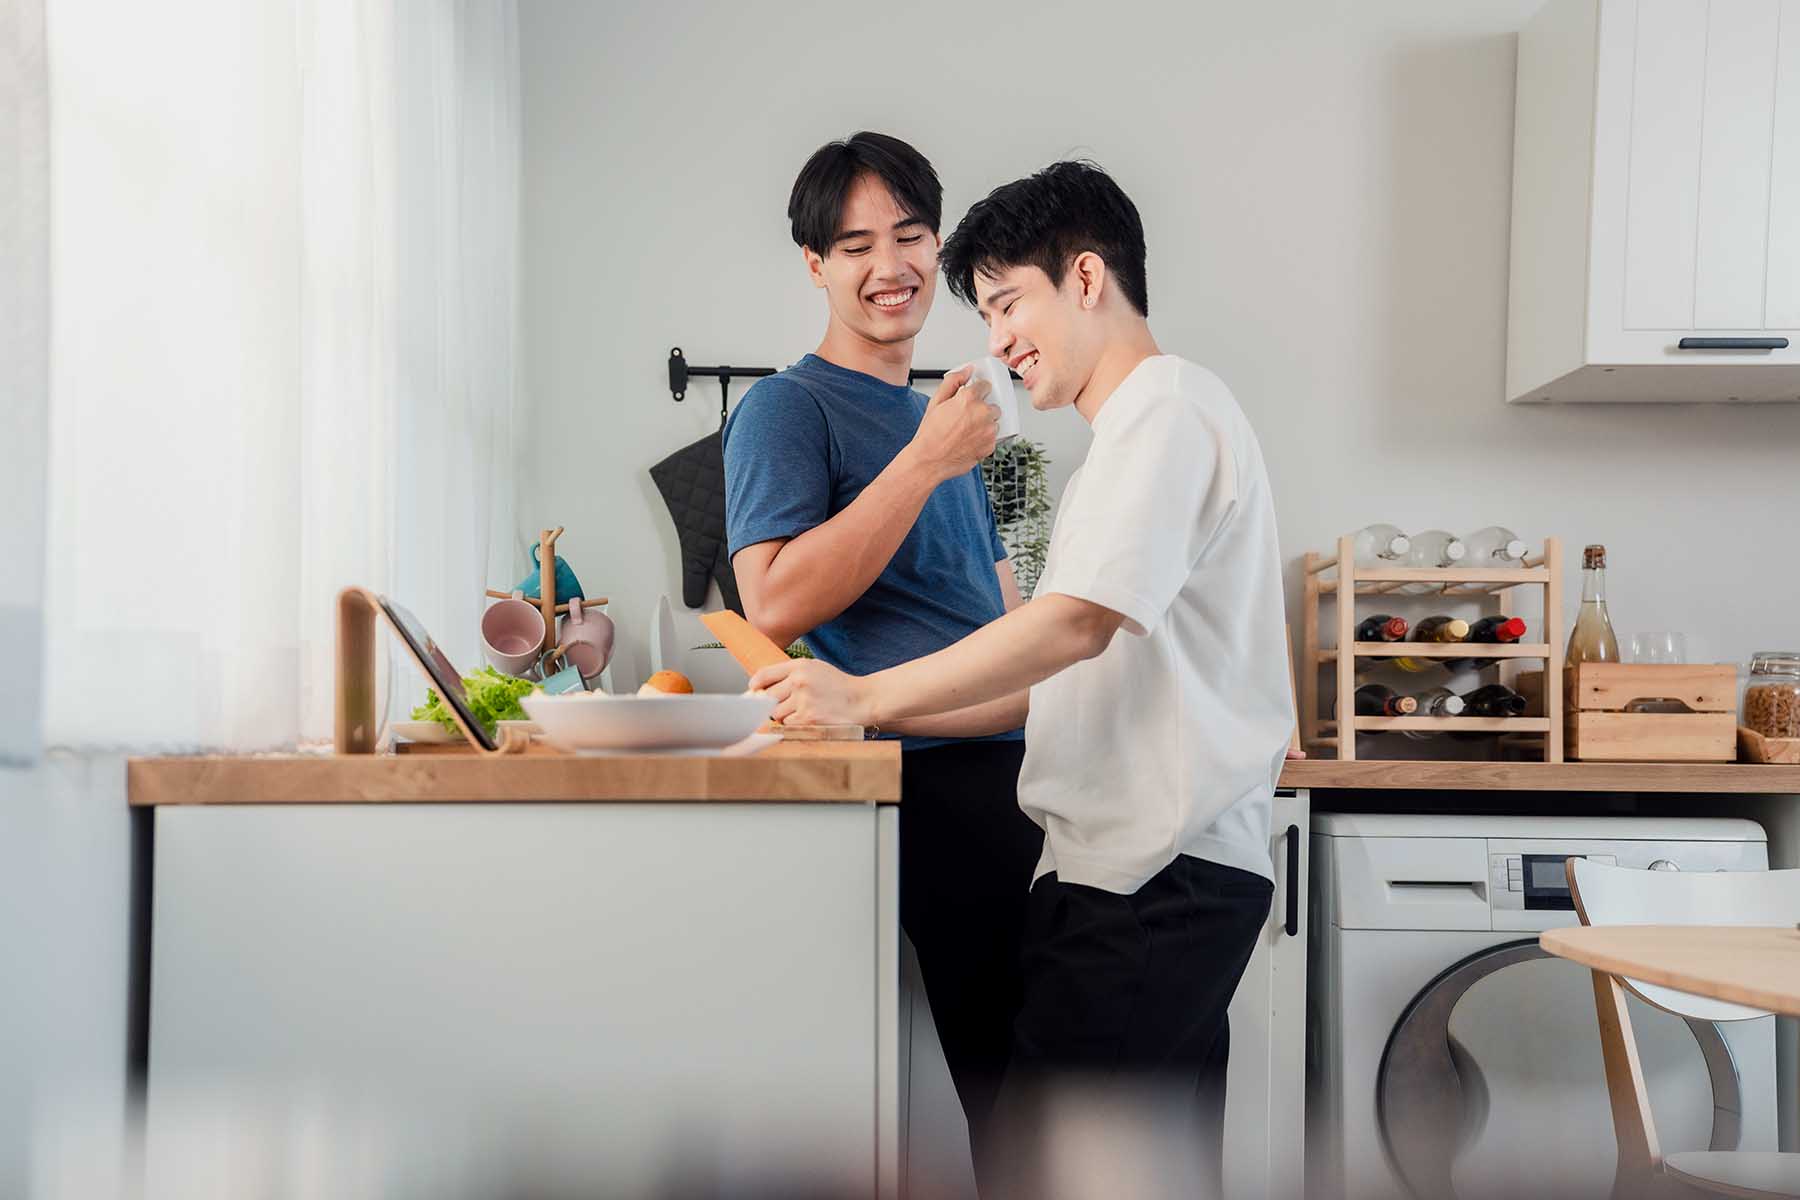 A couple in their home's kitchen, cooking a meal together